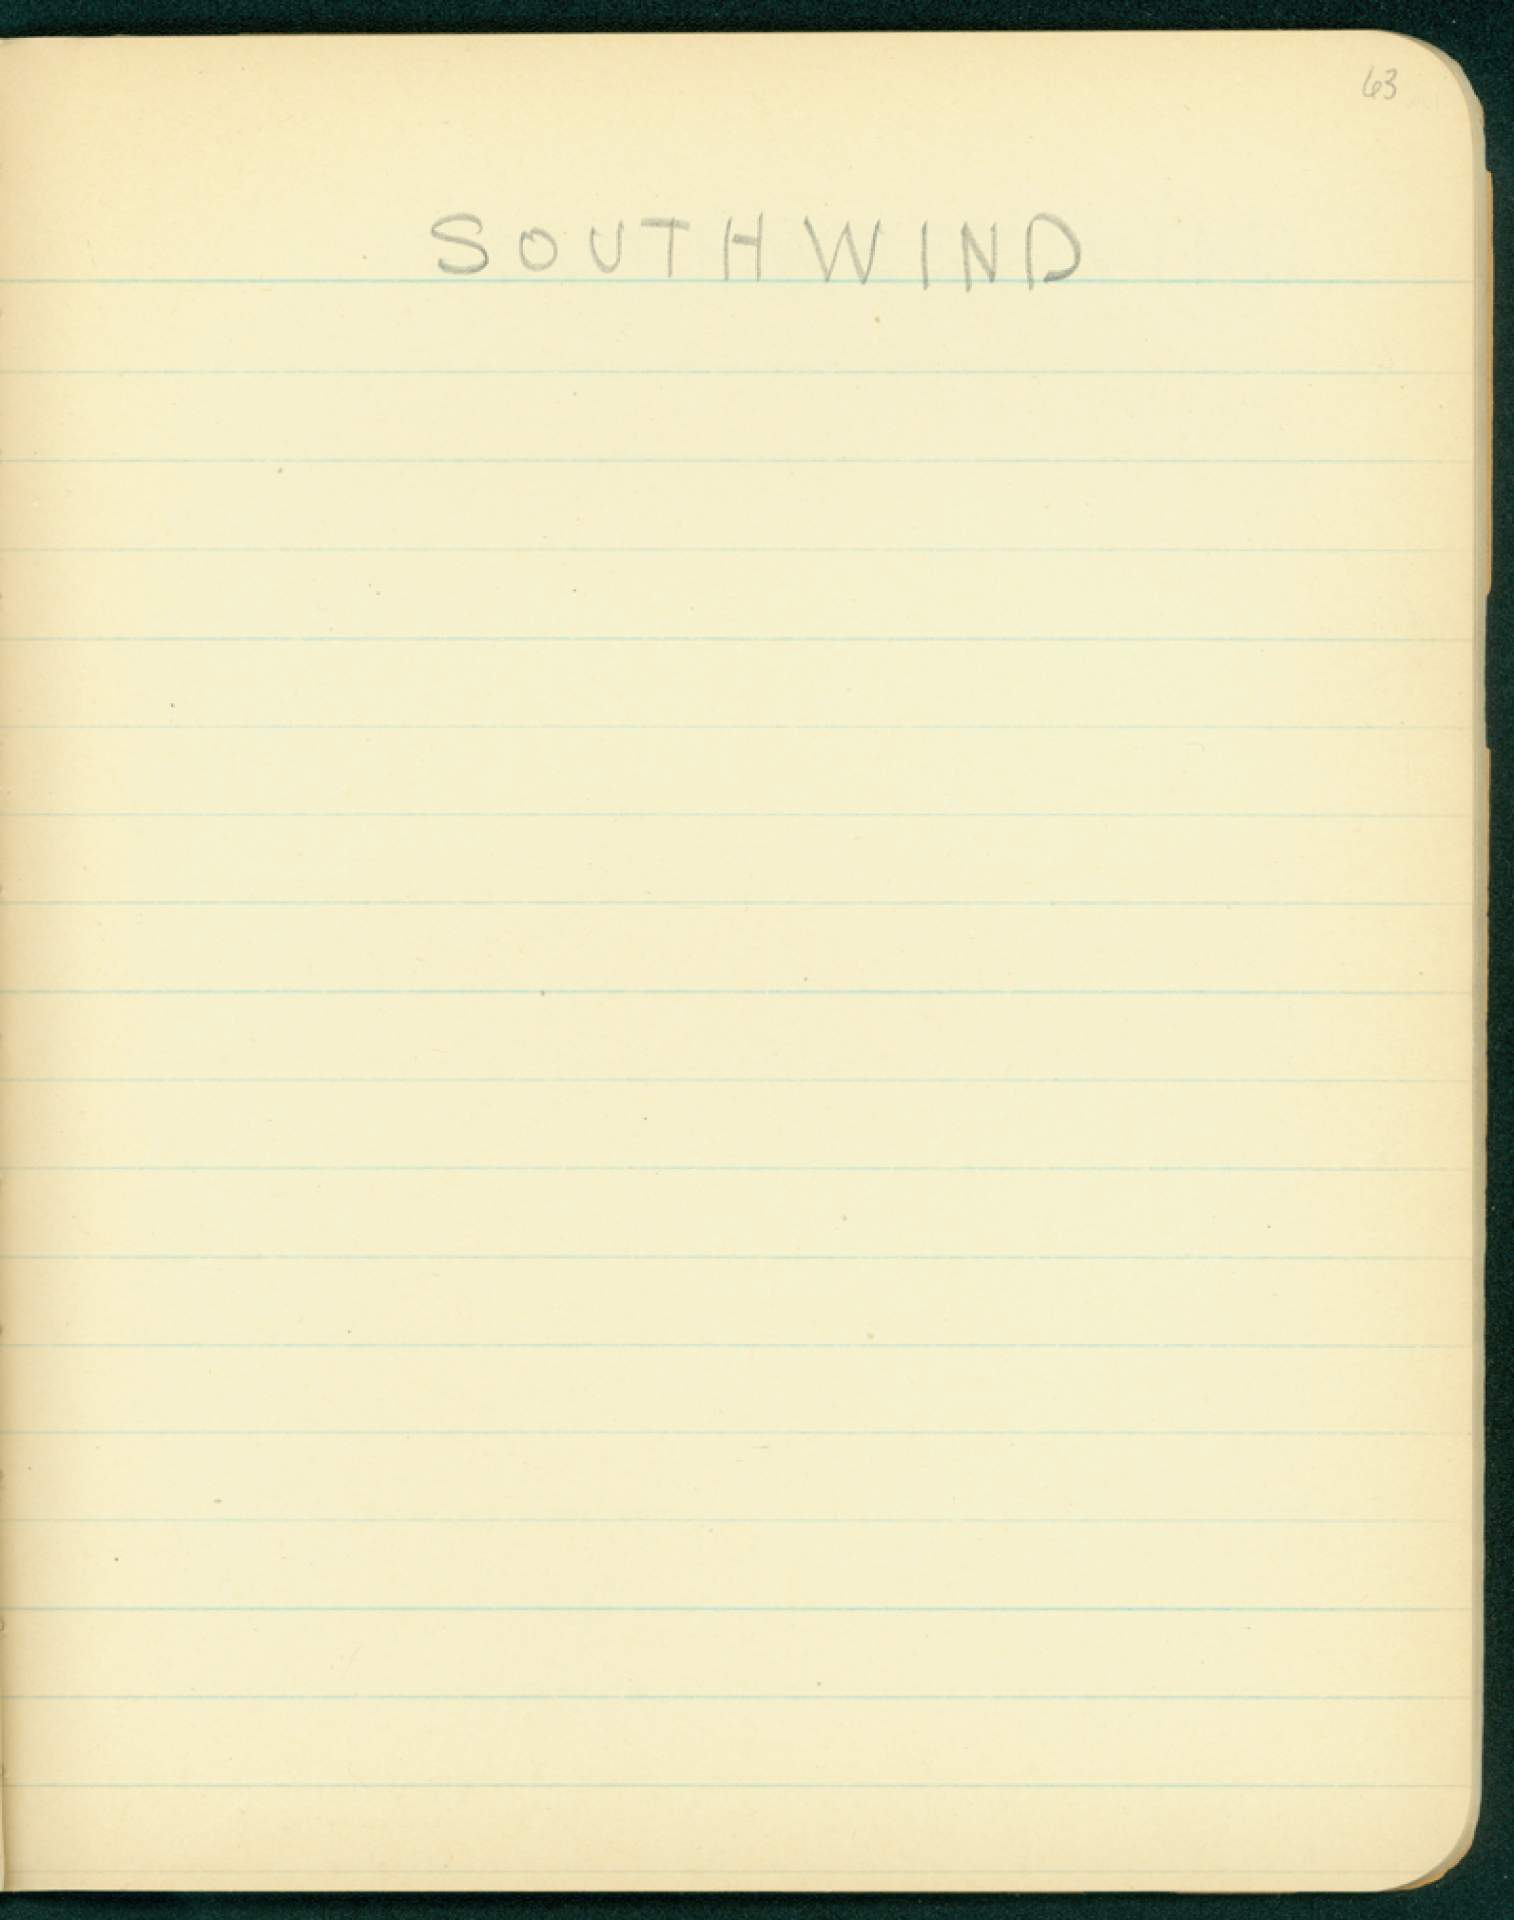 Untitled (South Wind)